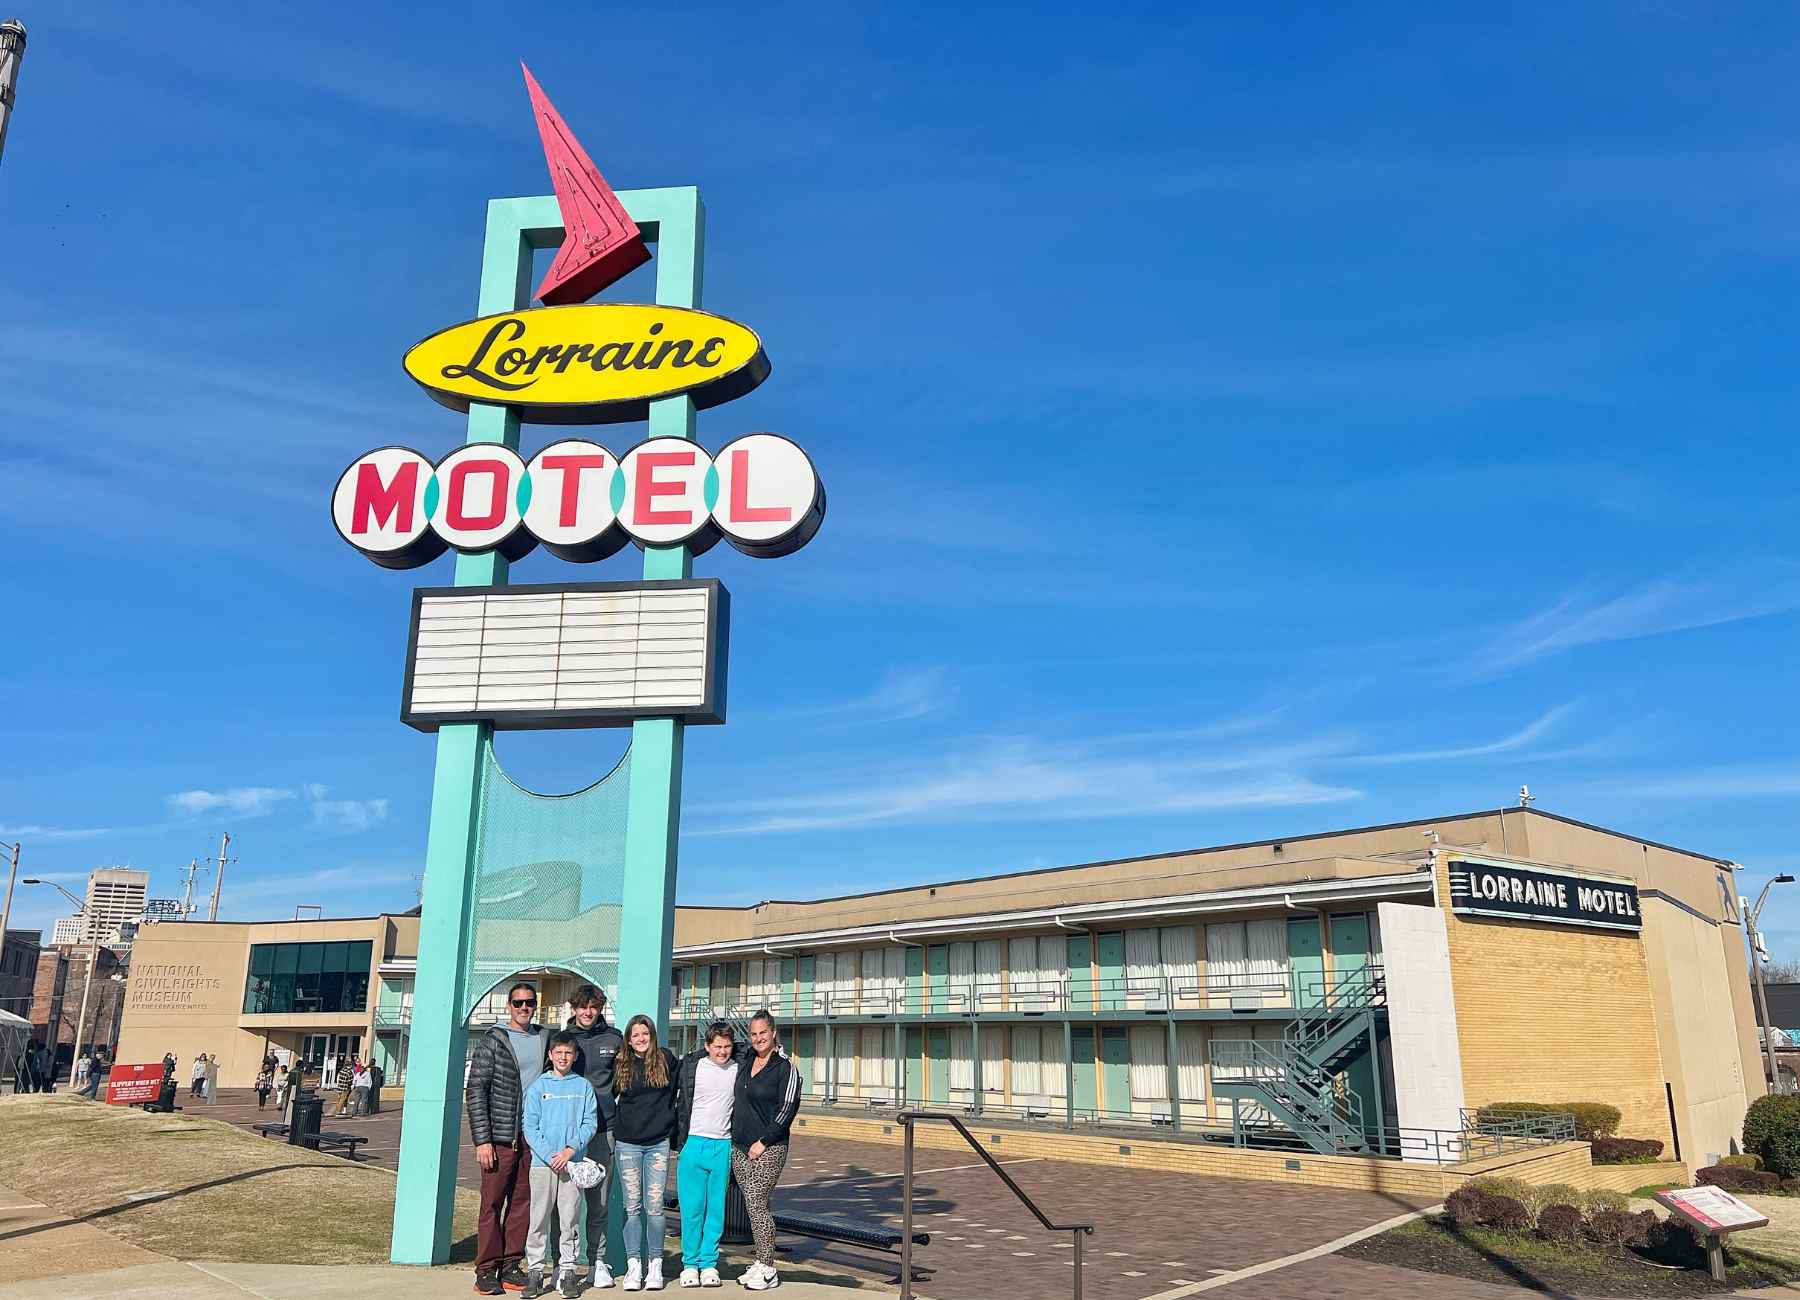 Our family standing by the Lorraine Motel sign.